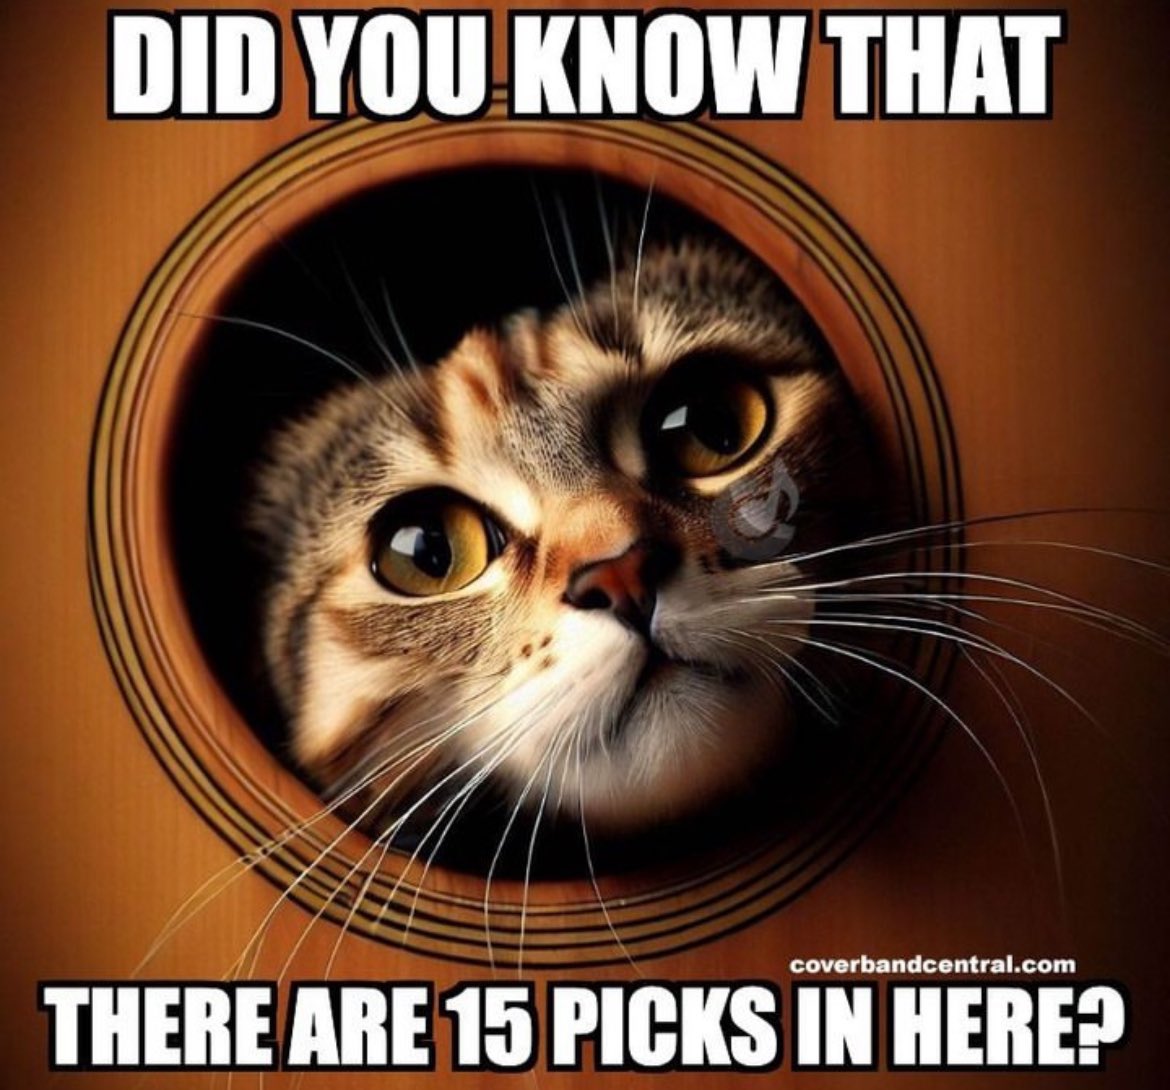 So that’s where they all went!!!

#music #musicmeme #guitar #guitarpick #coverbandcentral #monday #motivation #musiclessons #ottawa #AlcornMusic #growingmusicians